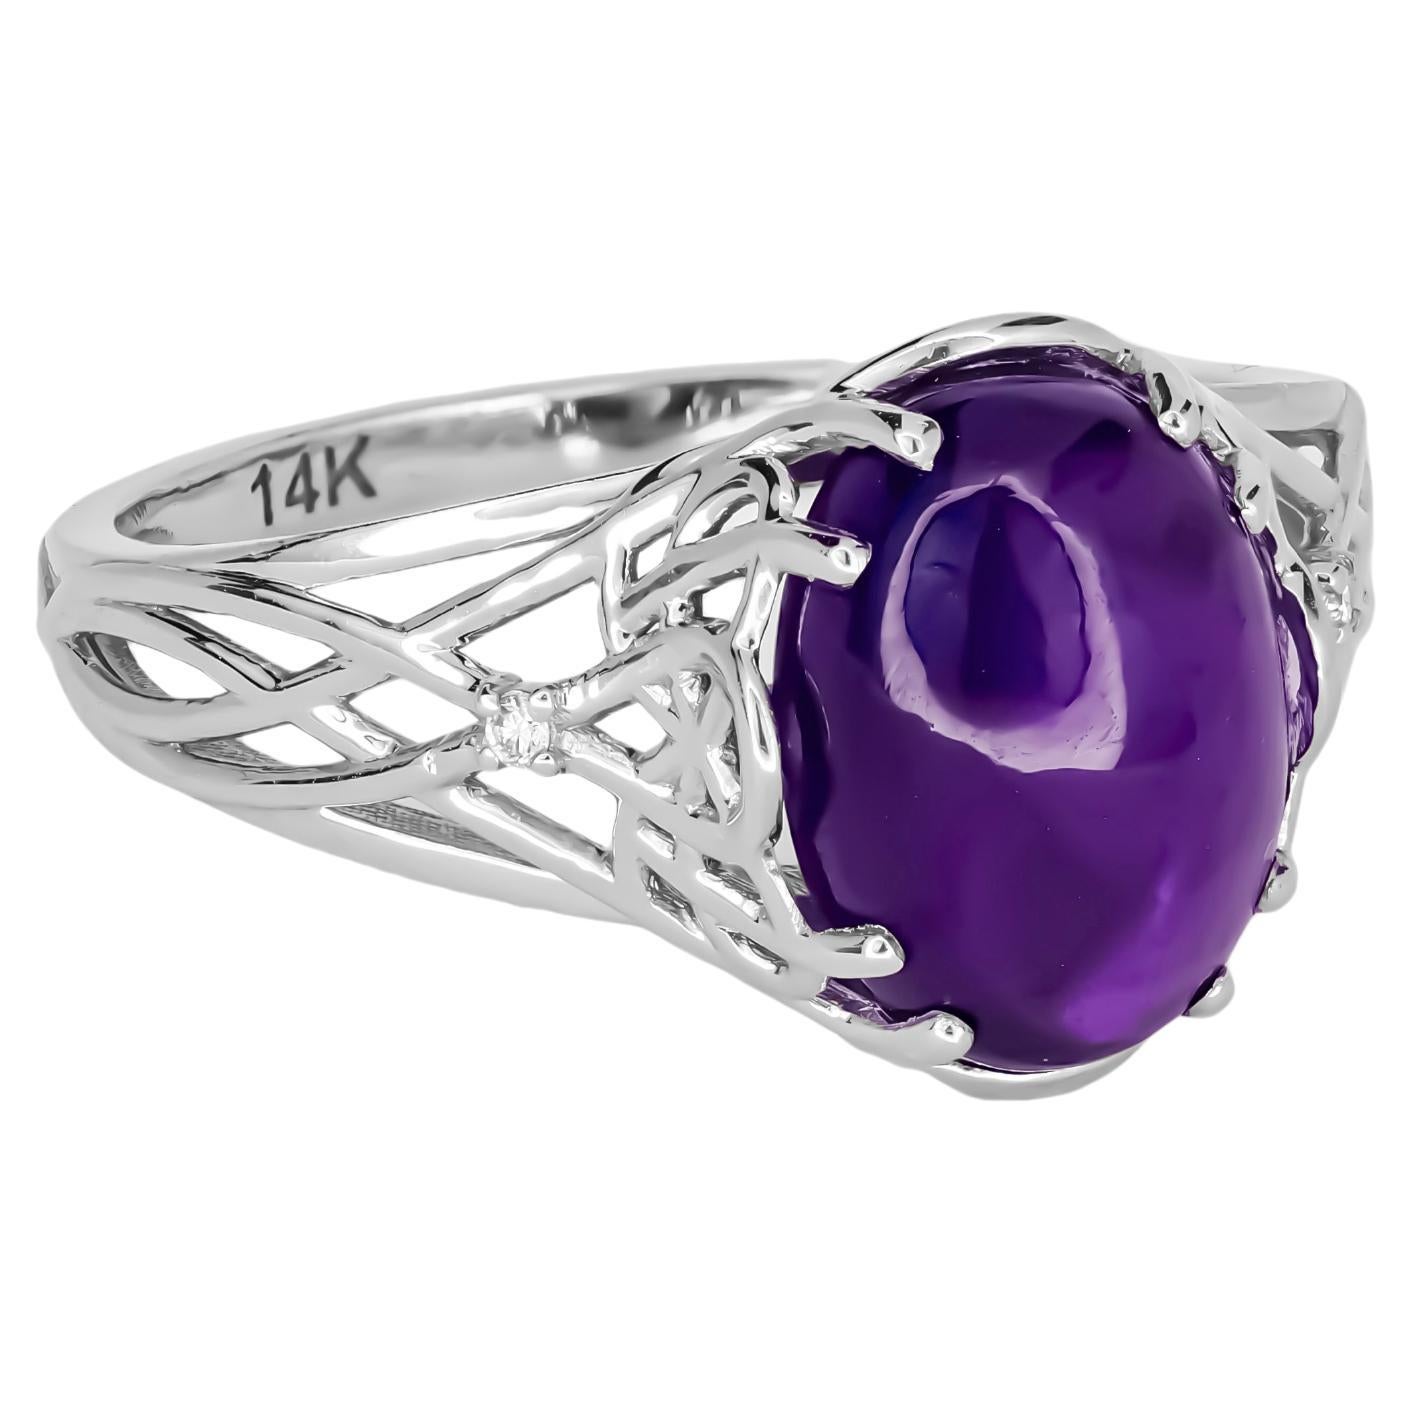 Amethyst cabochon 14k gold ring.  For Sale